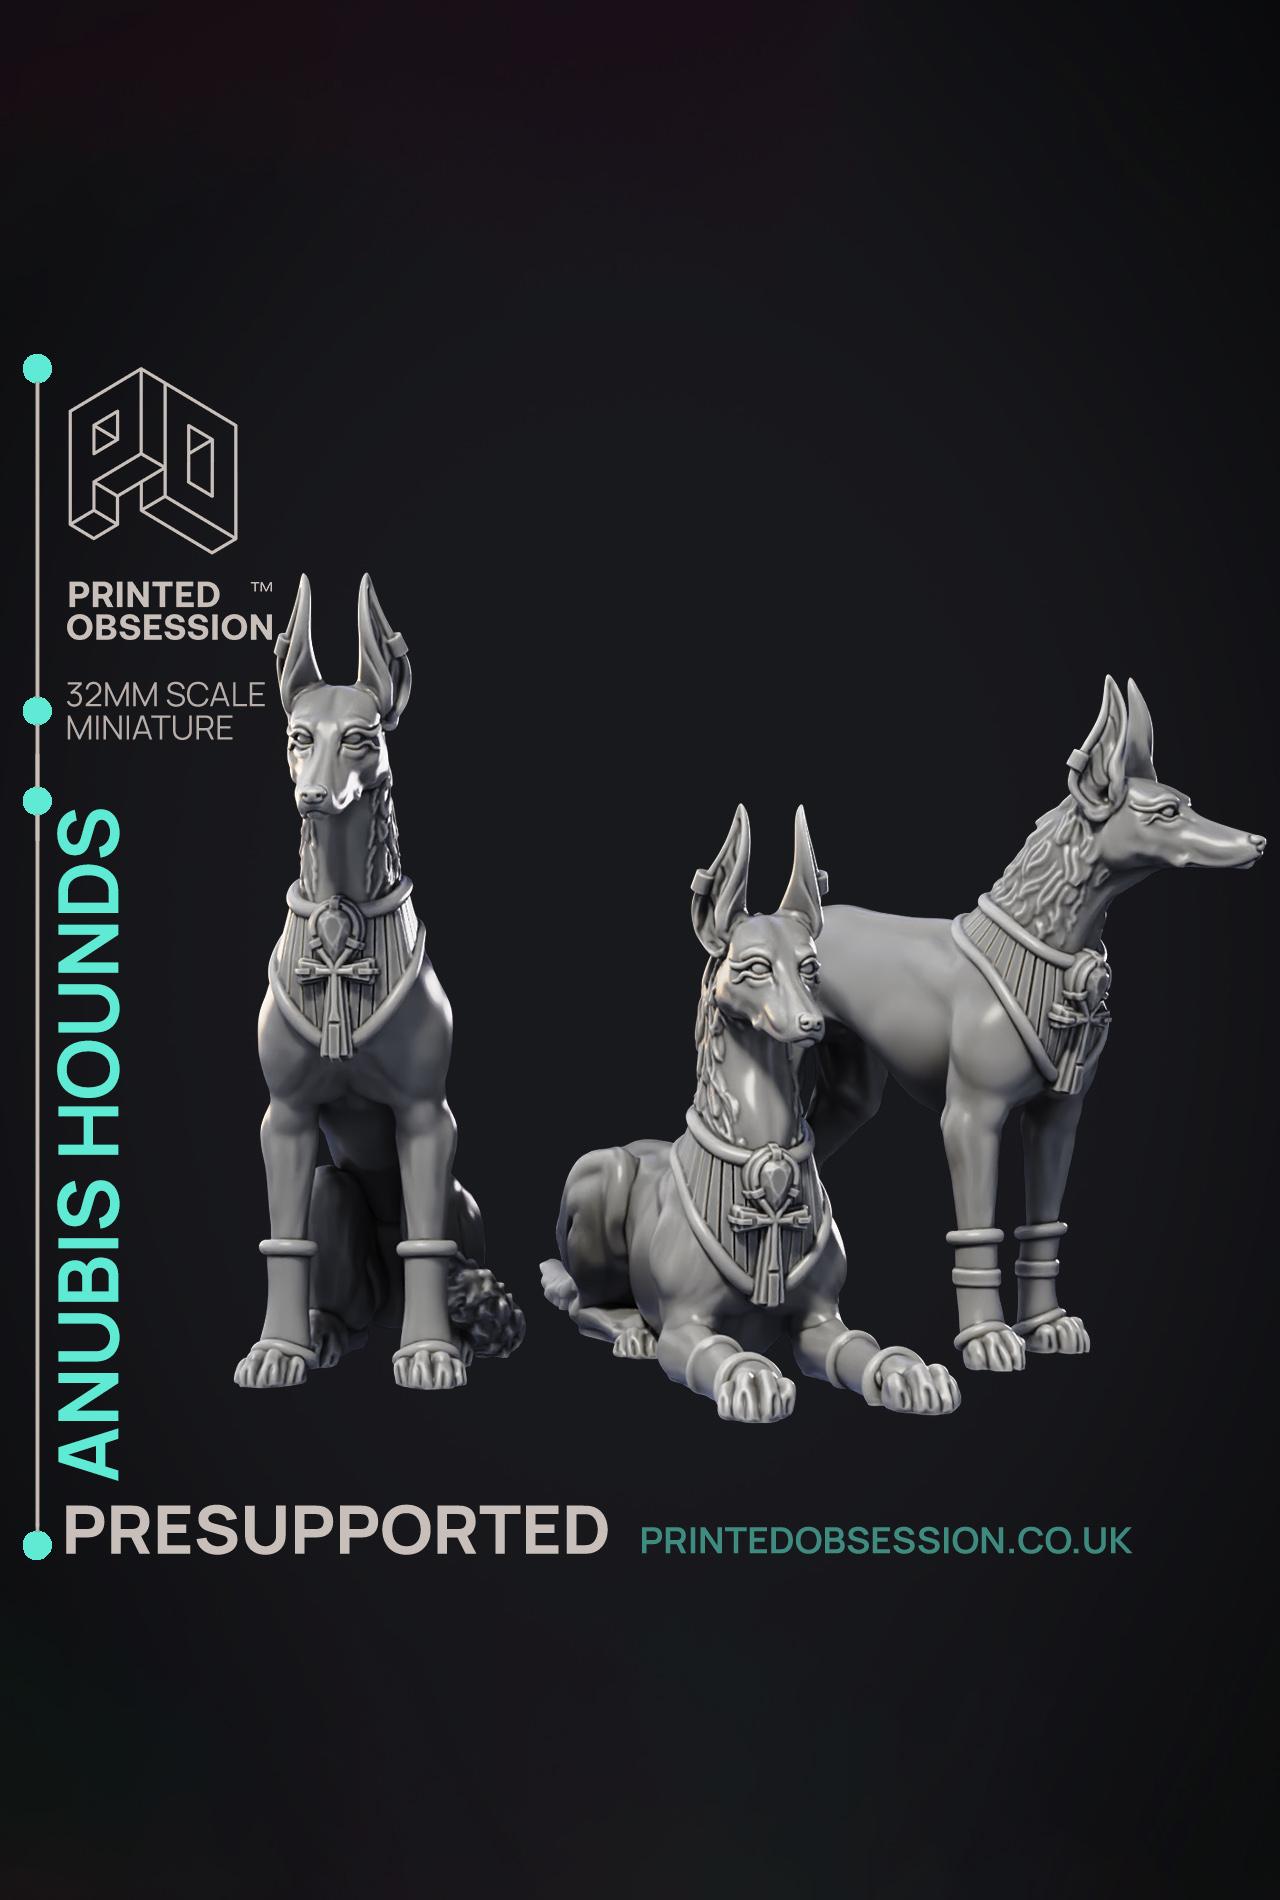 Anubis Hounds - 3 Model - Court of Anubis -  PRESUPPORTED - Illustrated and Stats - 32mm scale 3d model